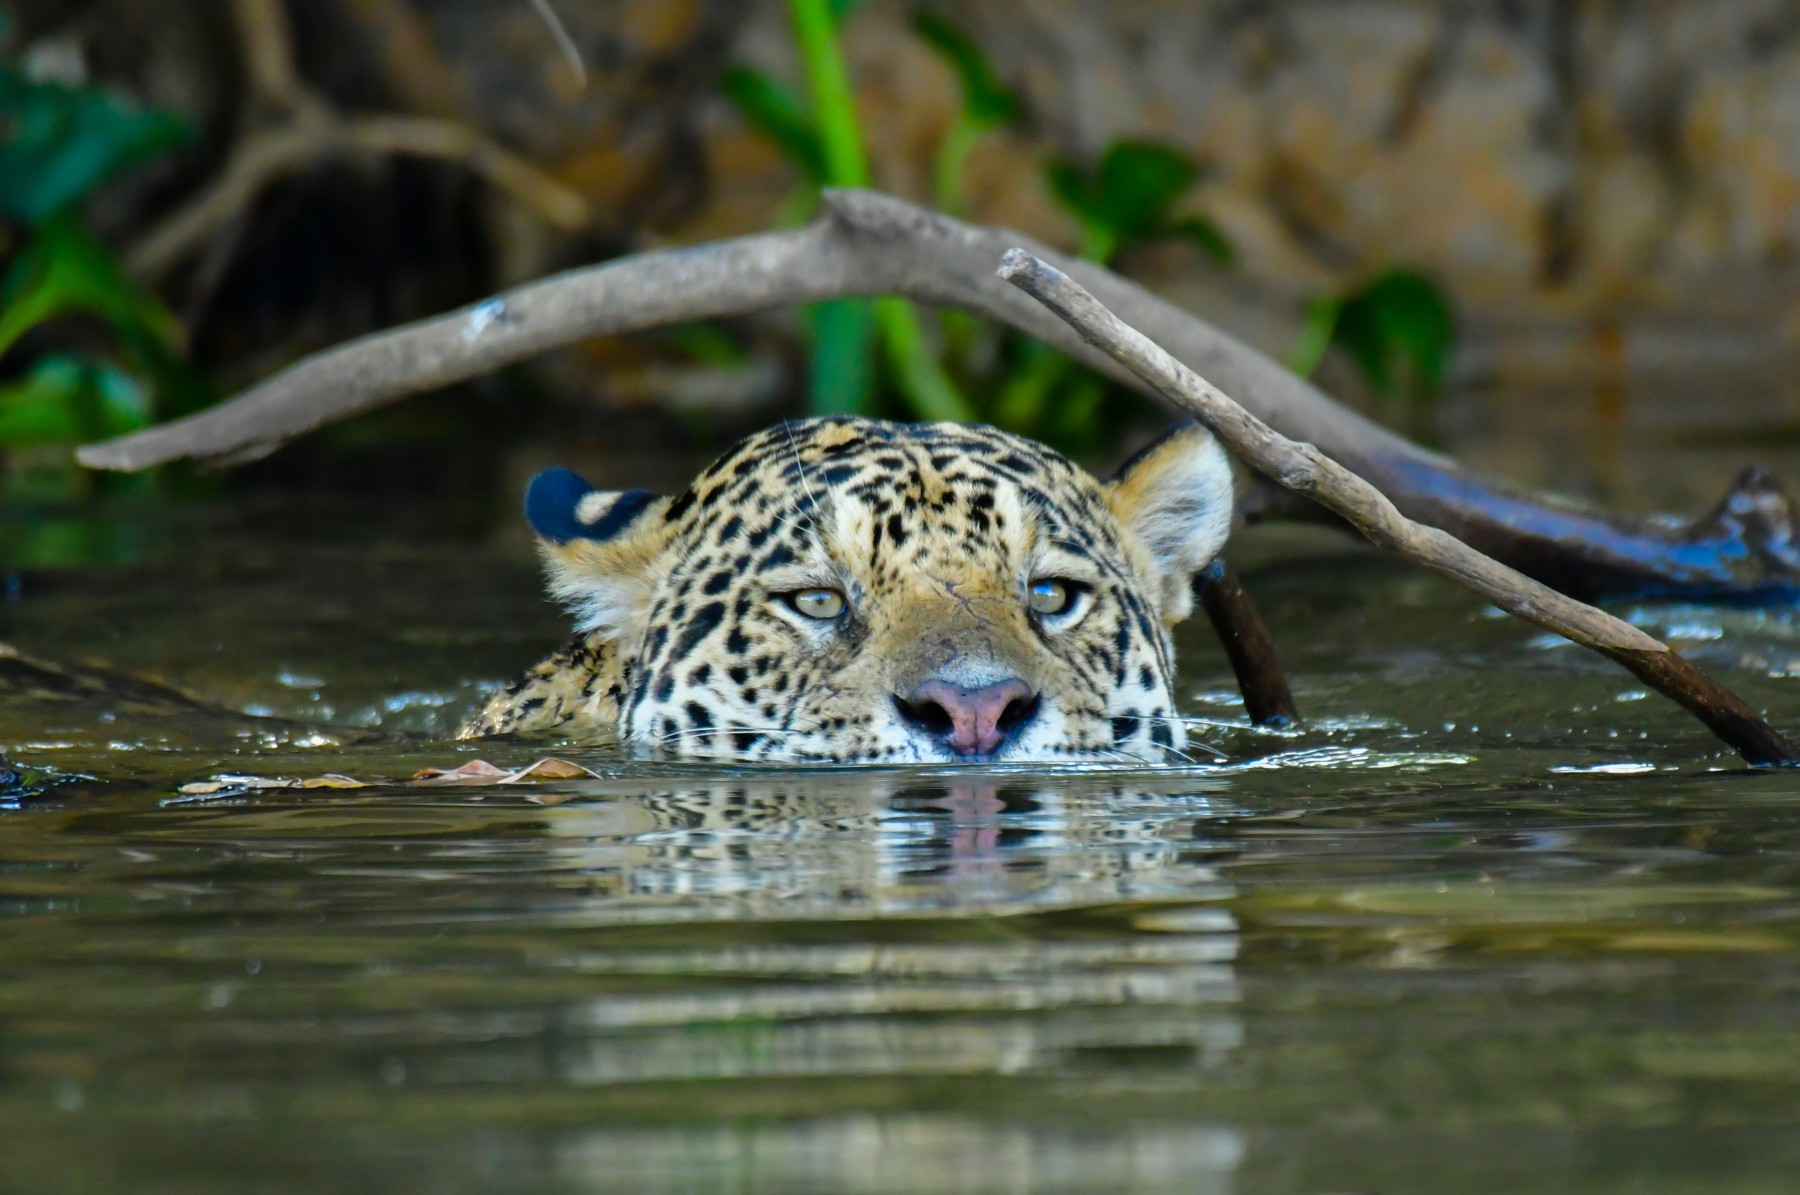 A wild jaguar swimming in the water